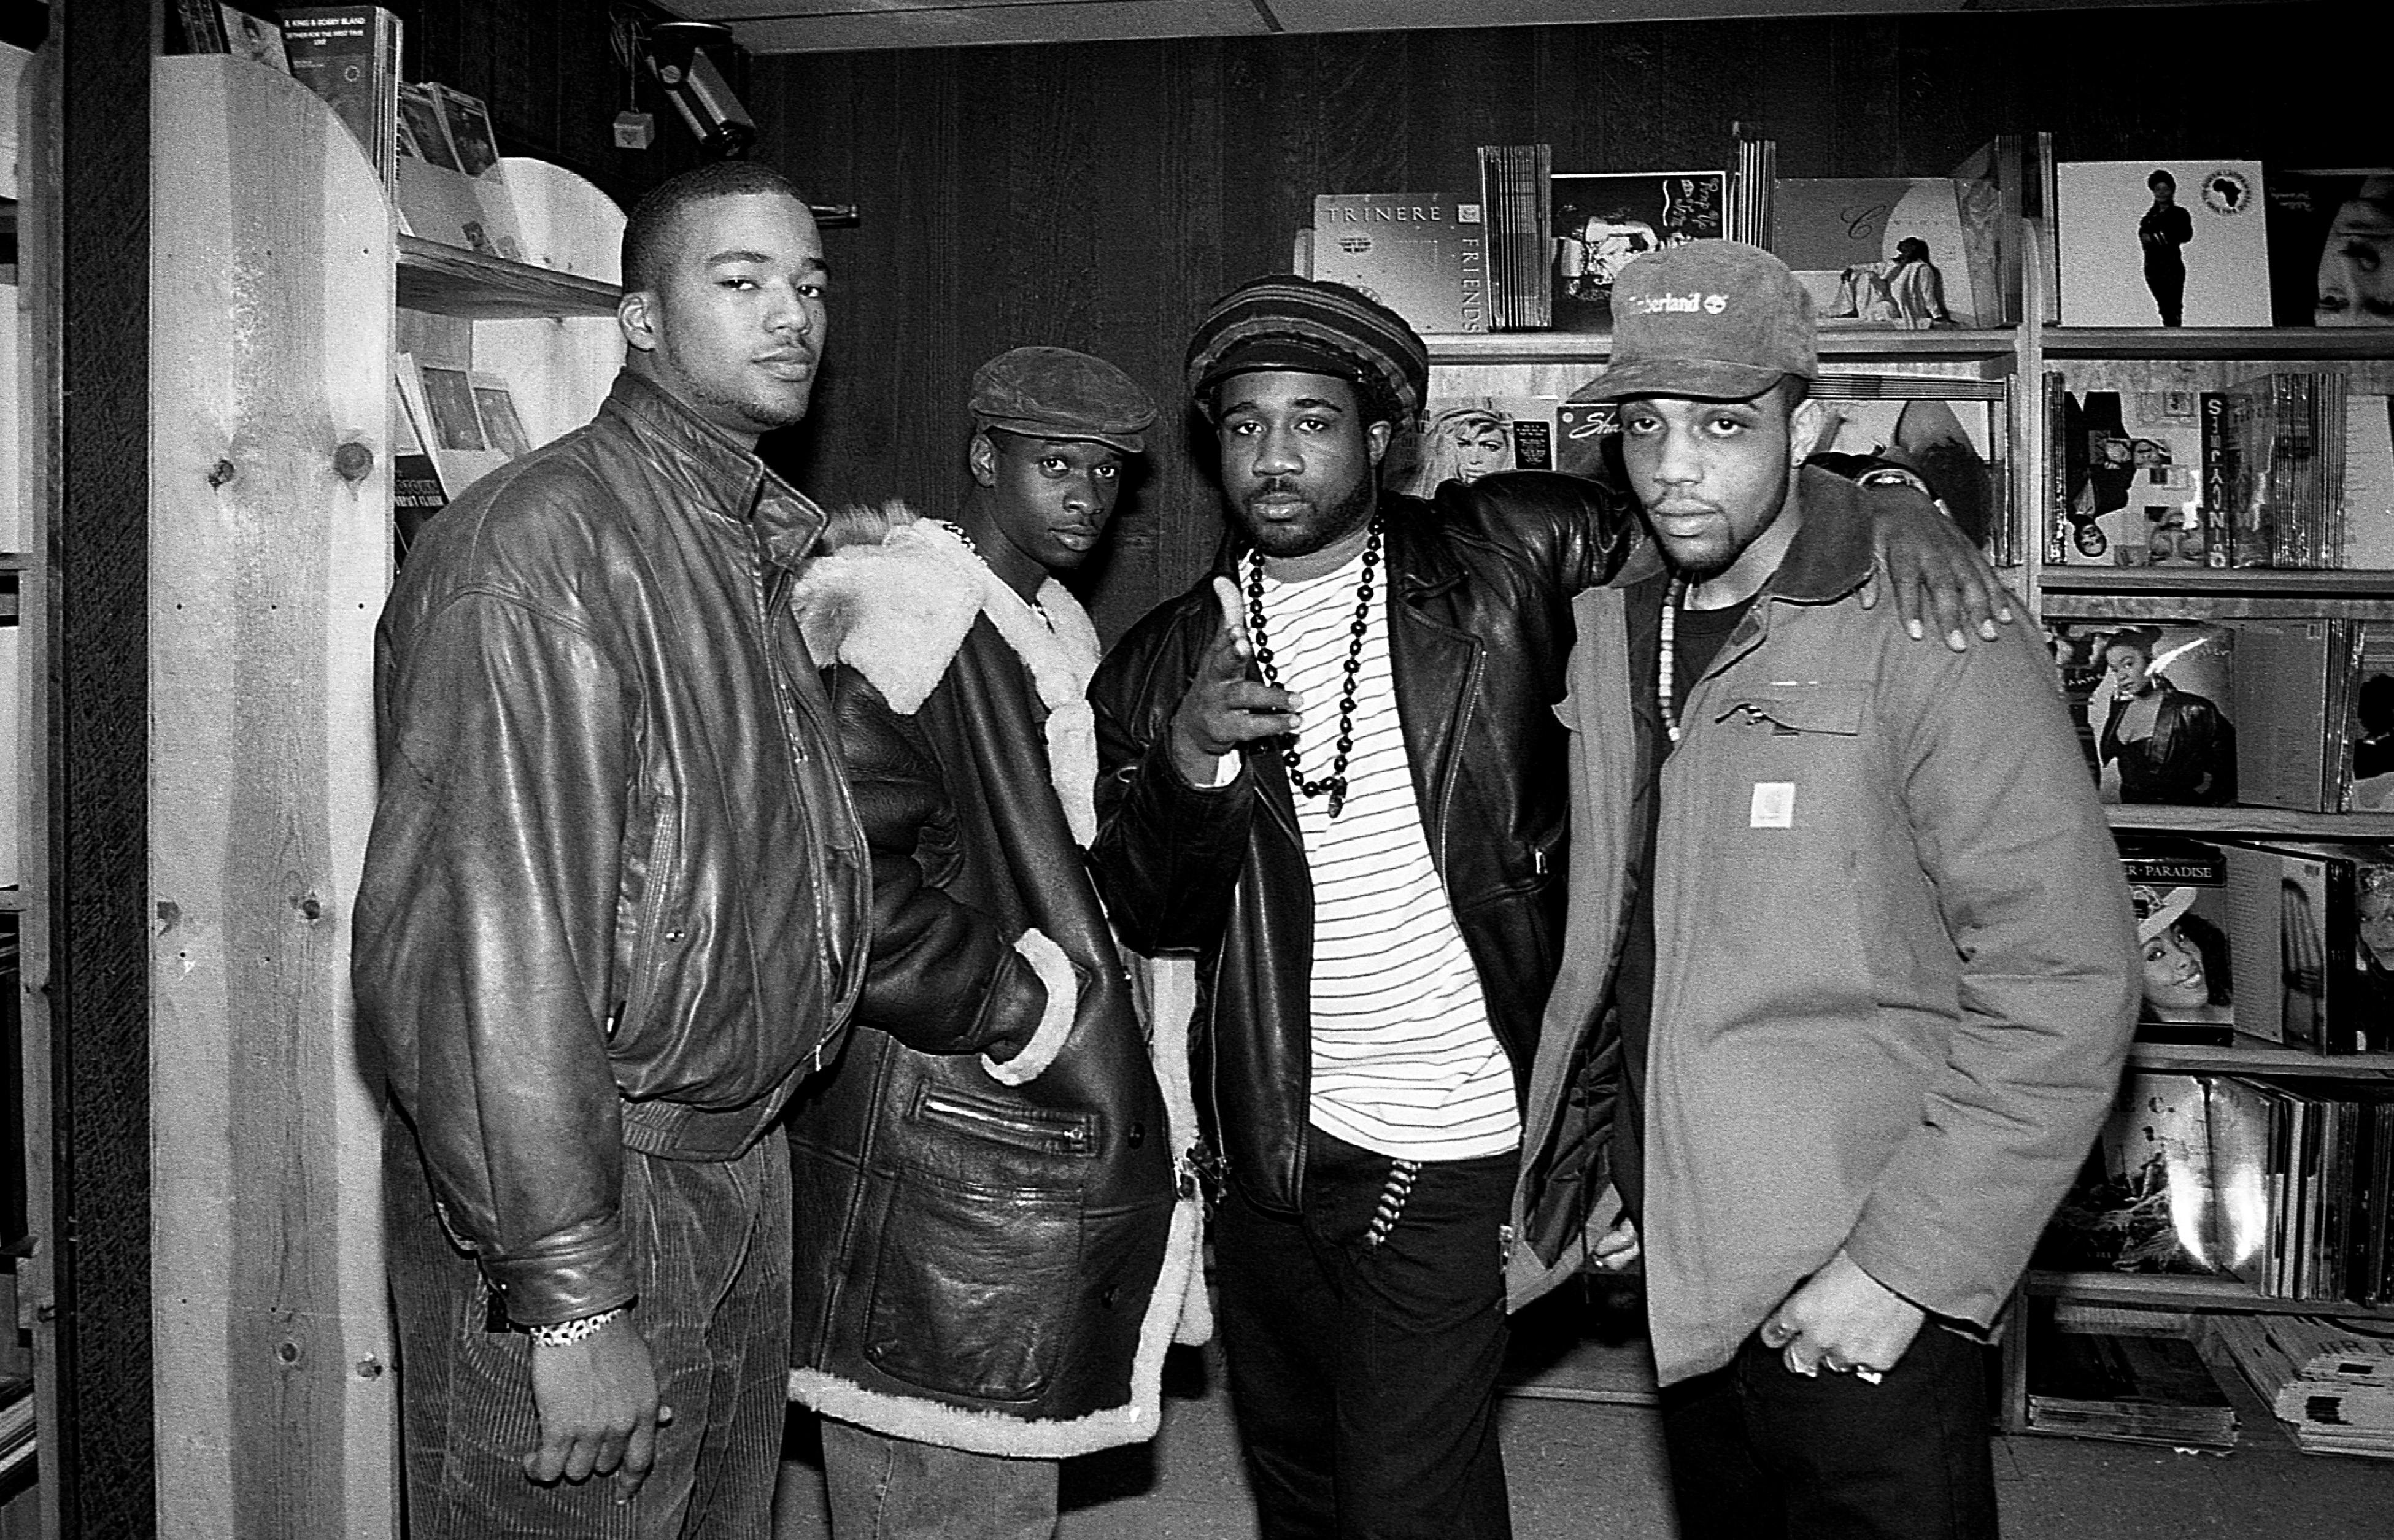 Music industry executive Chris Lighty (left) poses for photos with DJ Sammy B. and rappers Mike Gee and Afrika Baby Bam of The Jungle Brothers at Barney's One Stop record store in Chicago, Illinois in February 1990. 